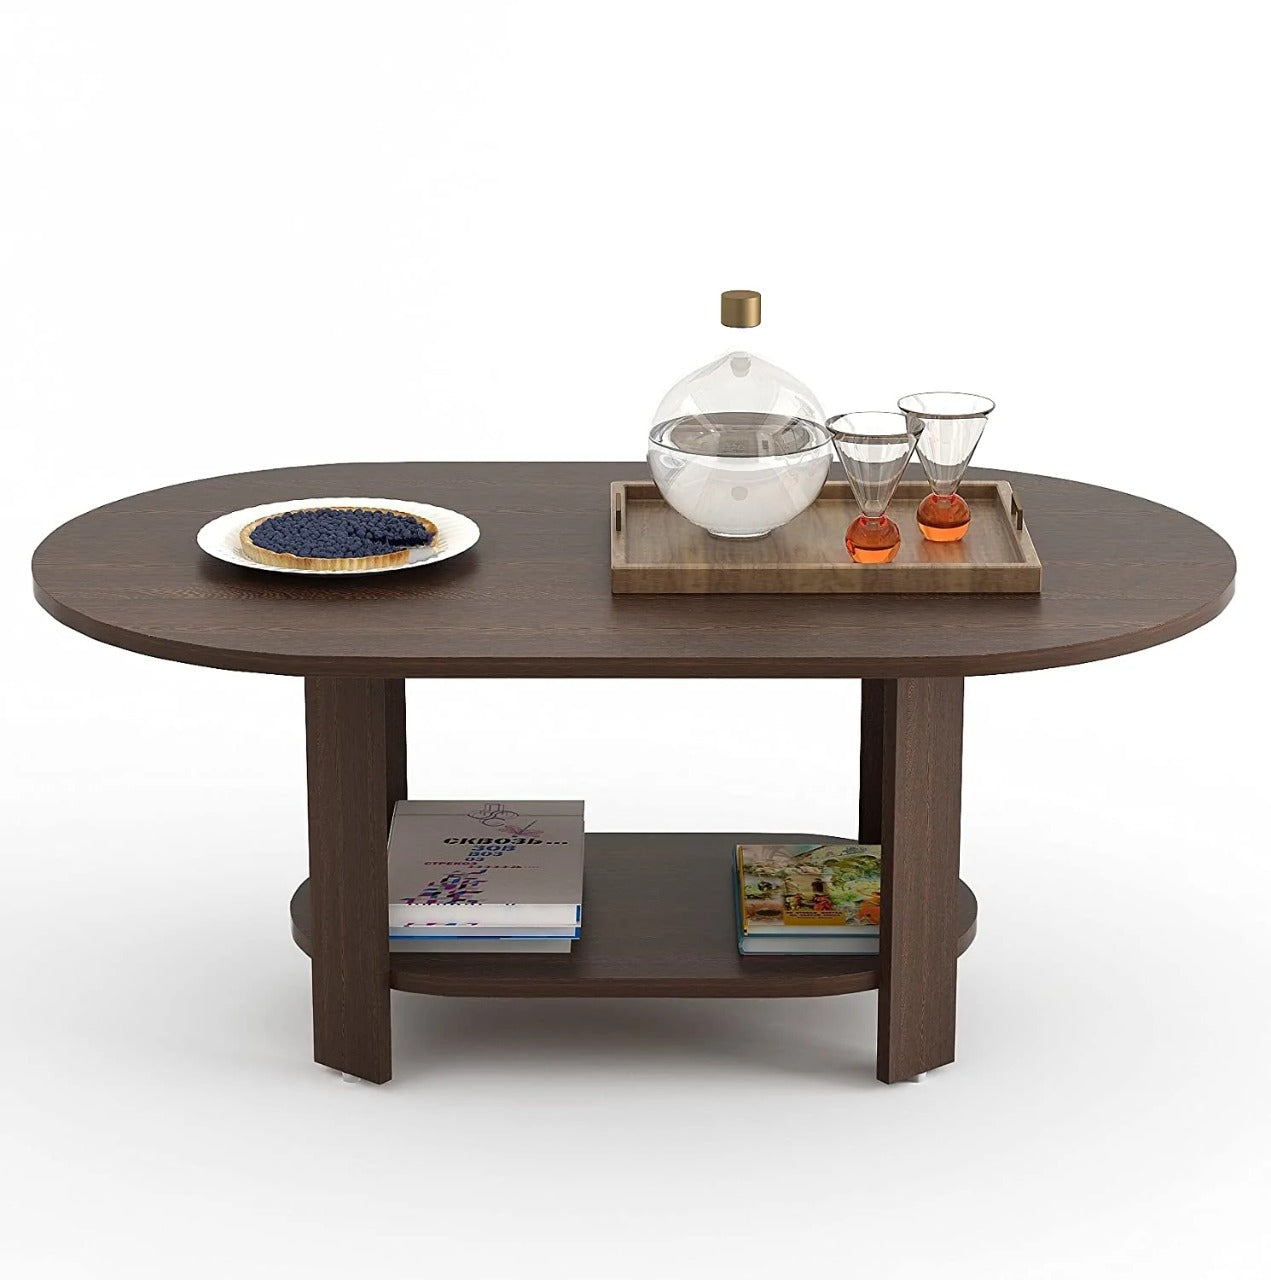 Coffee Table, Designer Coffee Table, Round Coffee Table, Wood Coffee Table, Coffee Tables For Living Room, Living Room Coffee Table, Modern Coffee Table, Coffee Table With Stools, Glass Coffee Table, Coffee Table Online